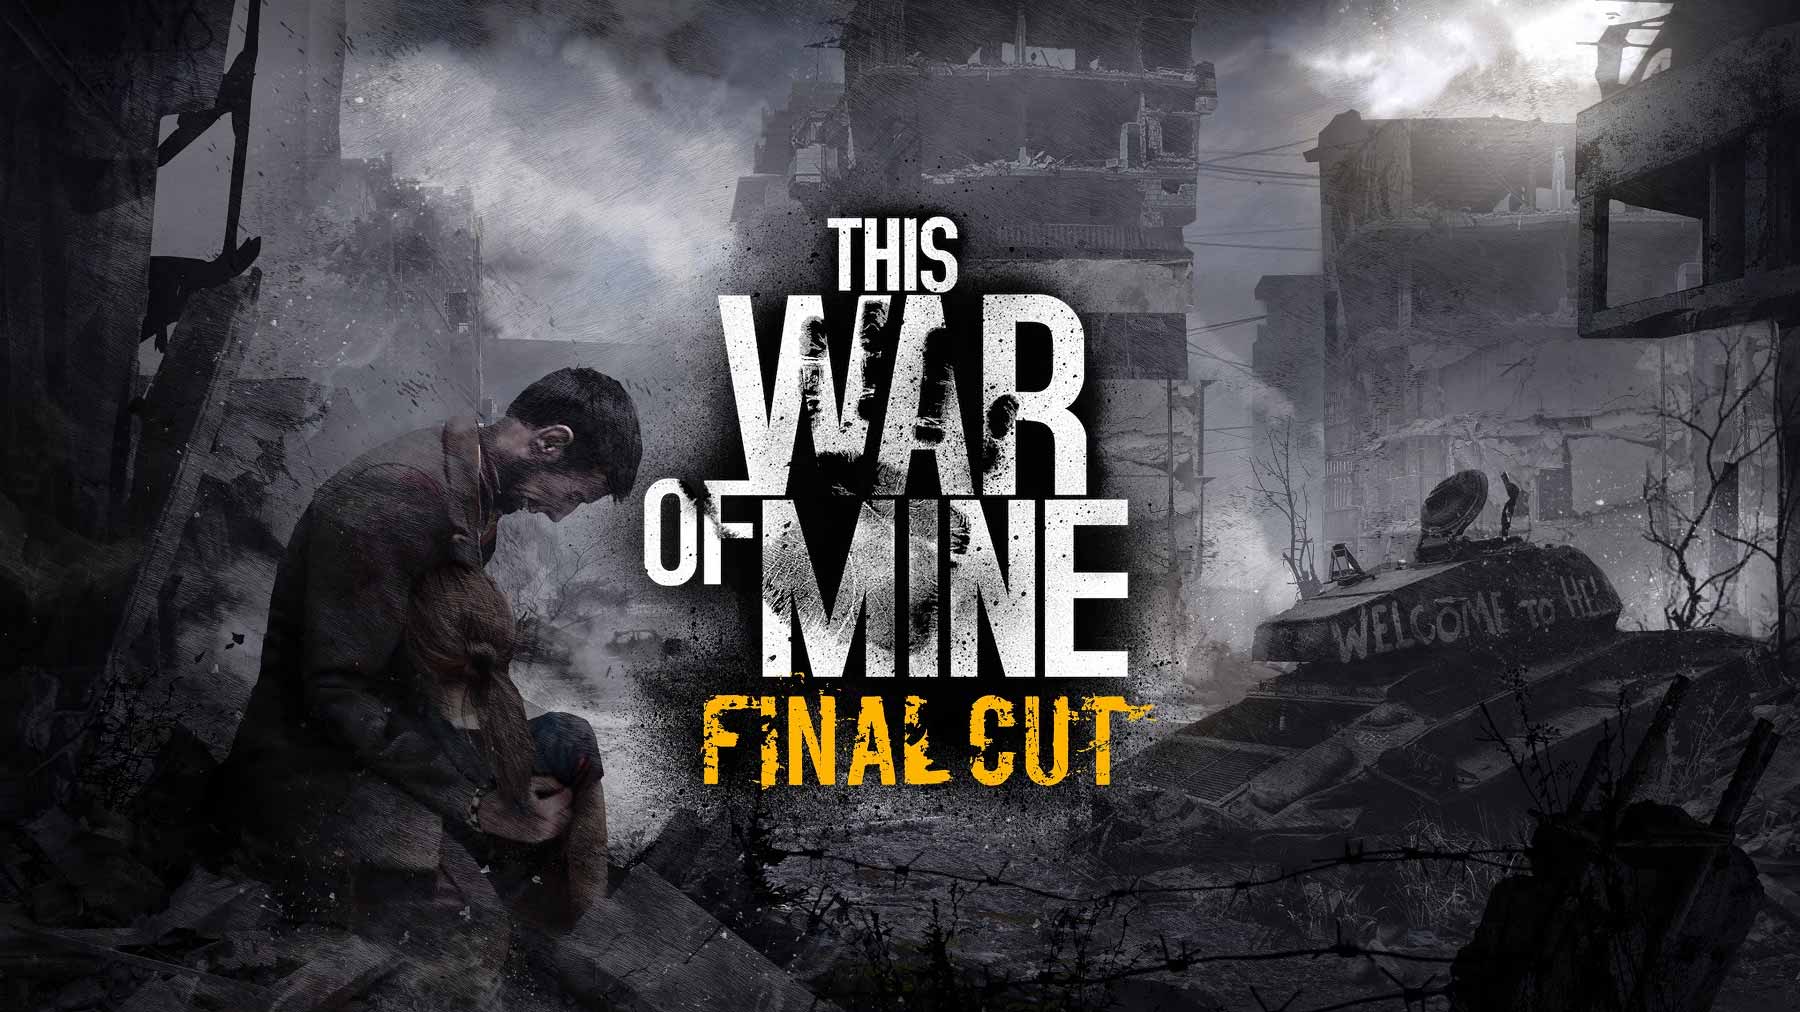 This War of Mine: Final Cut launches on PS5, Xbox Series X, and Game Pass on May 10